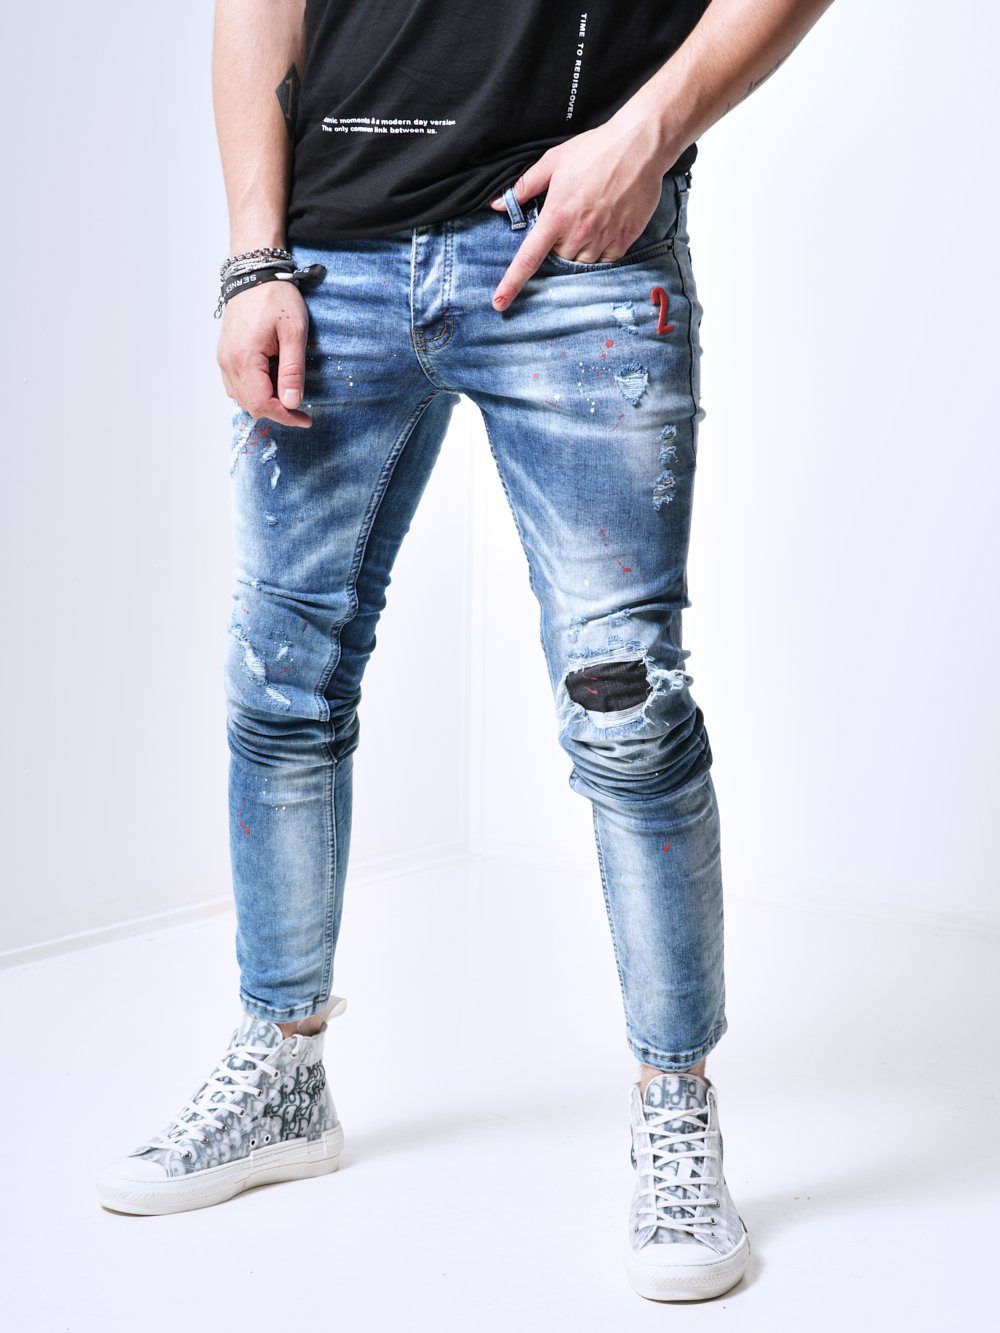 A man wearing the skinny fit streetwear jeans called THE SPECIAL ONE by SERNES